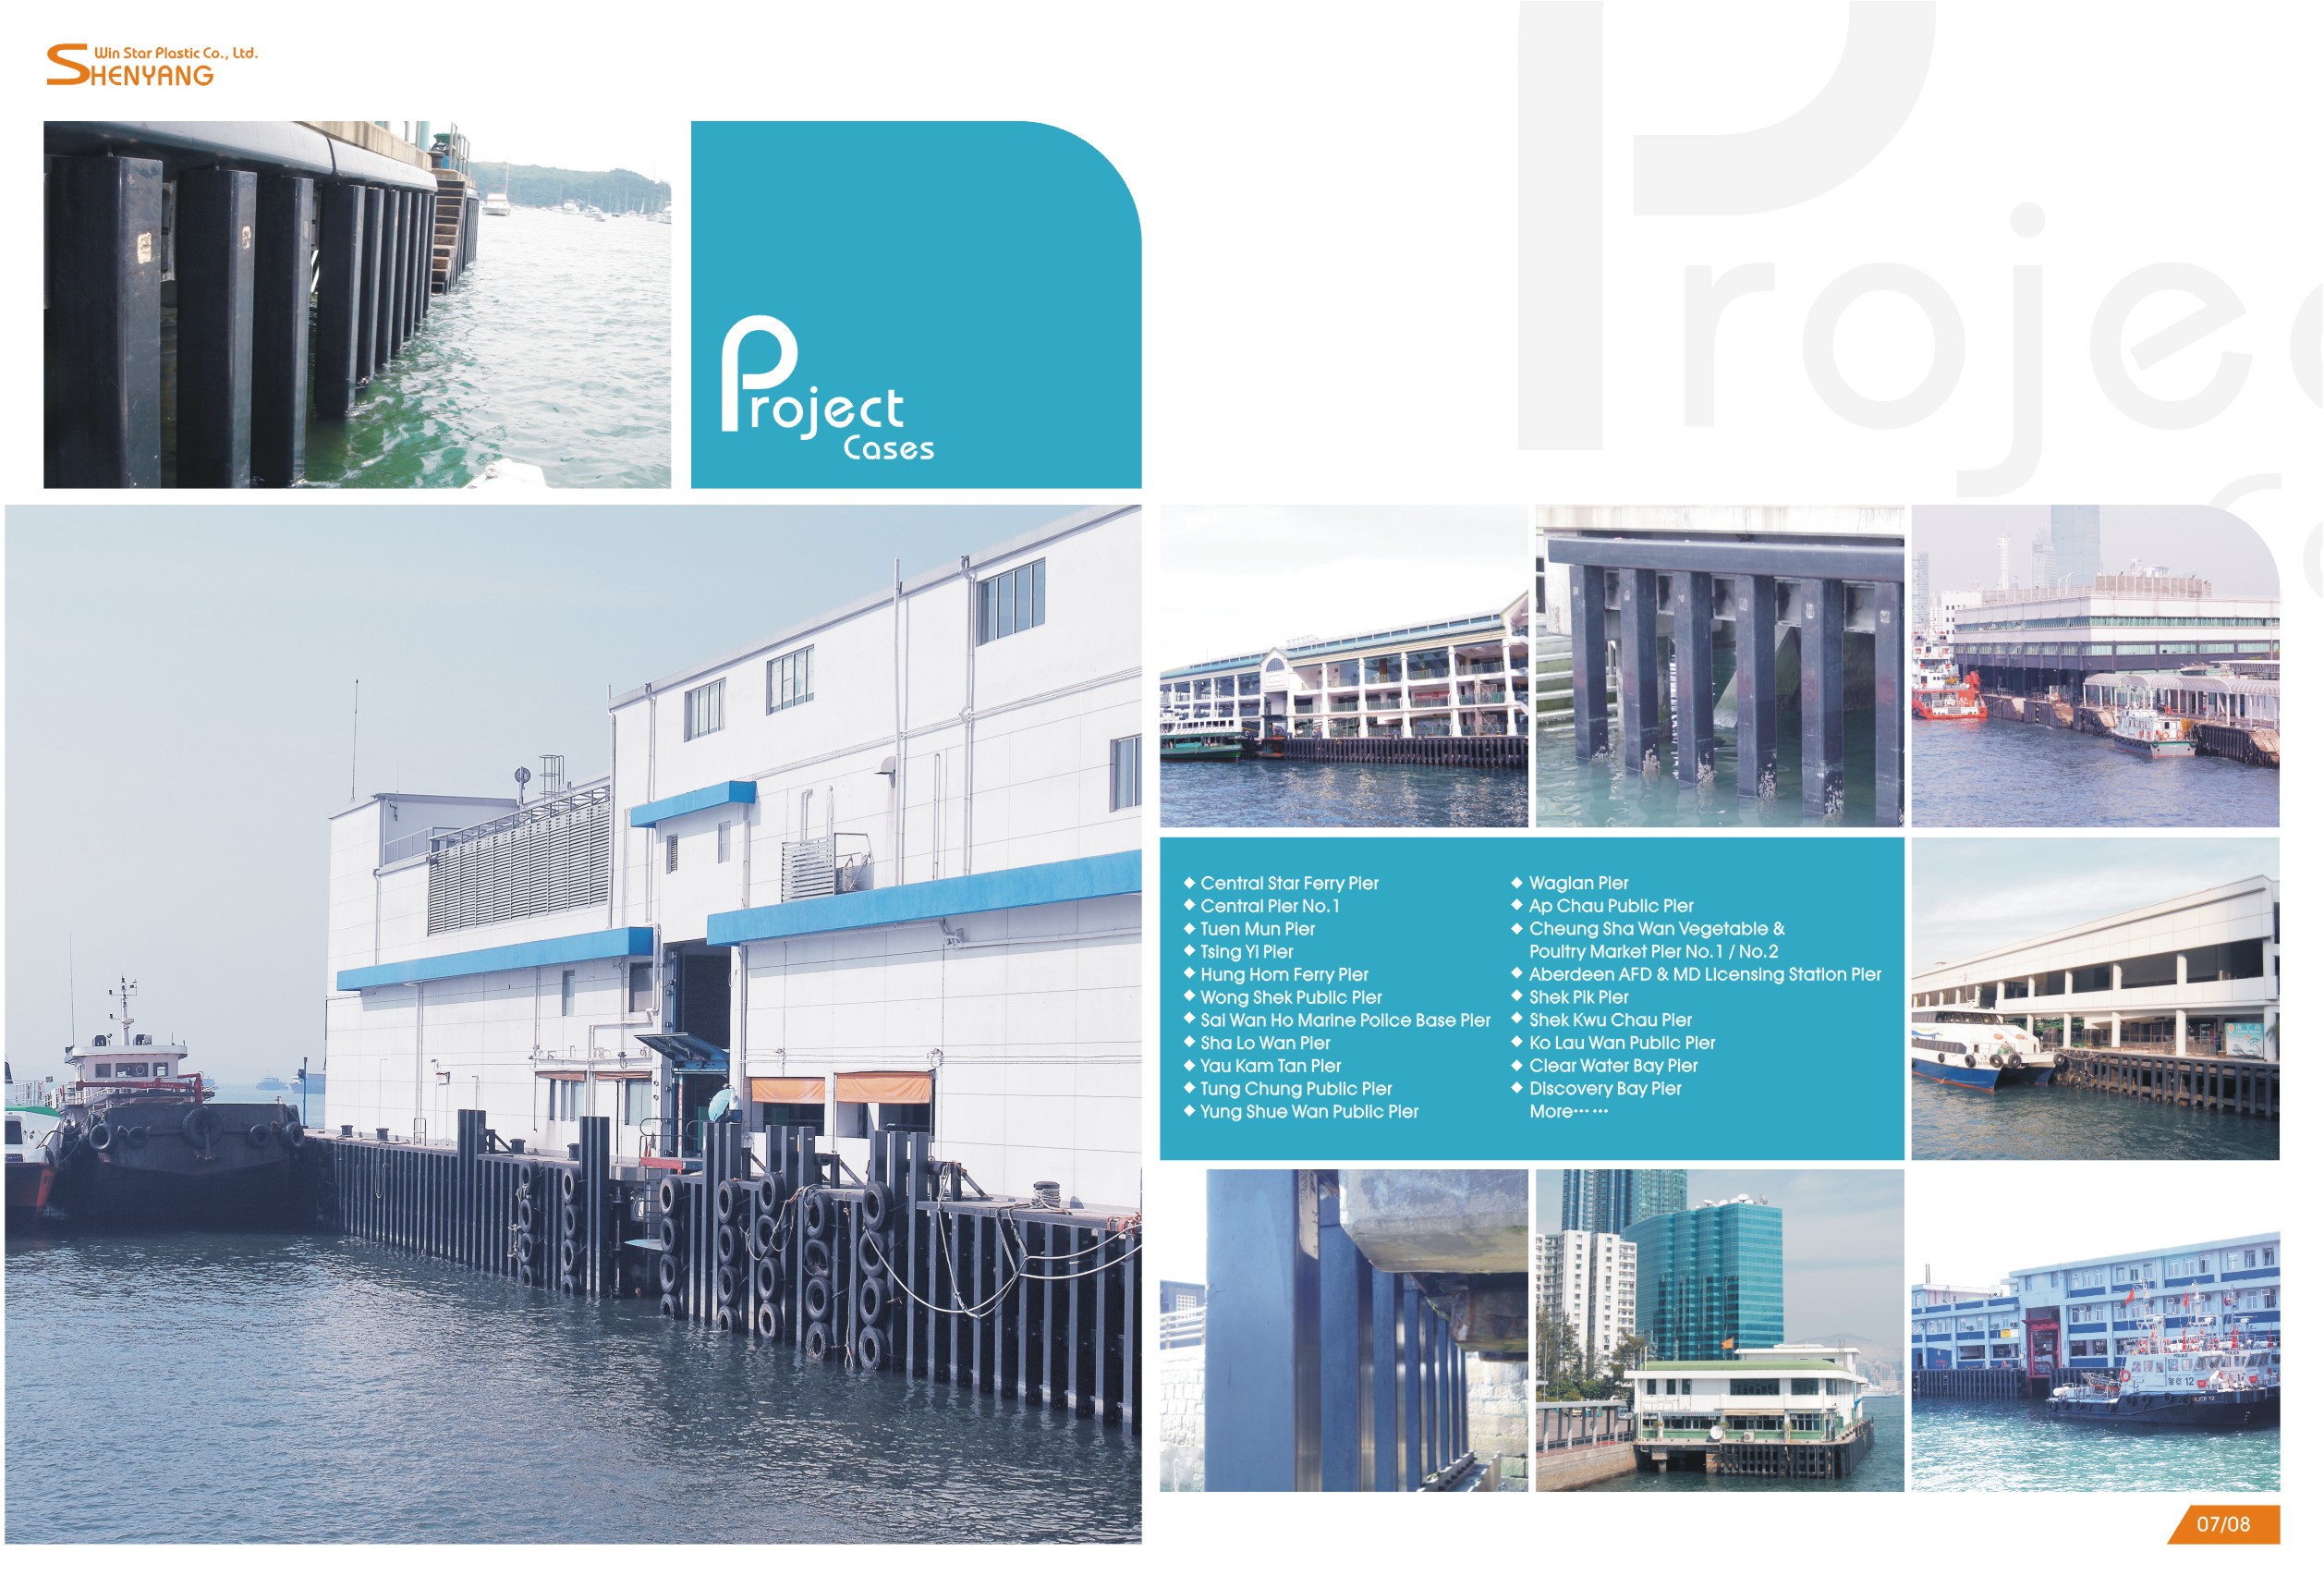 Best-selling chemical-resistance non - leaching plastic jetty fender